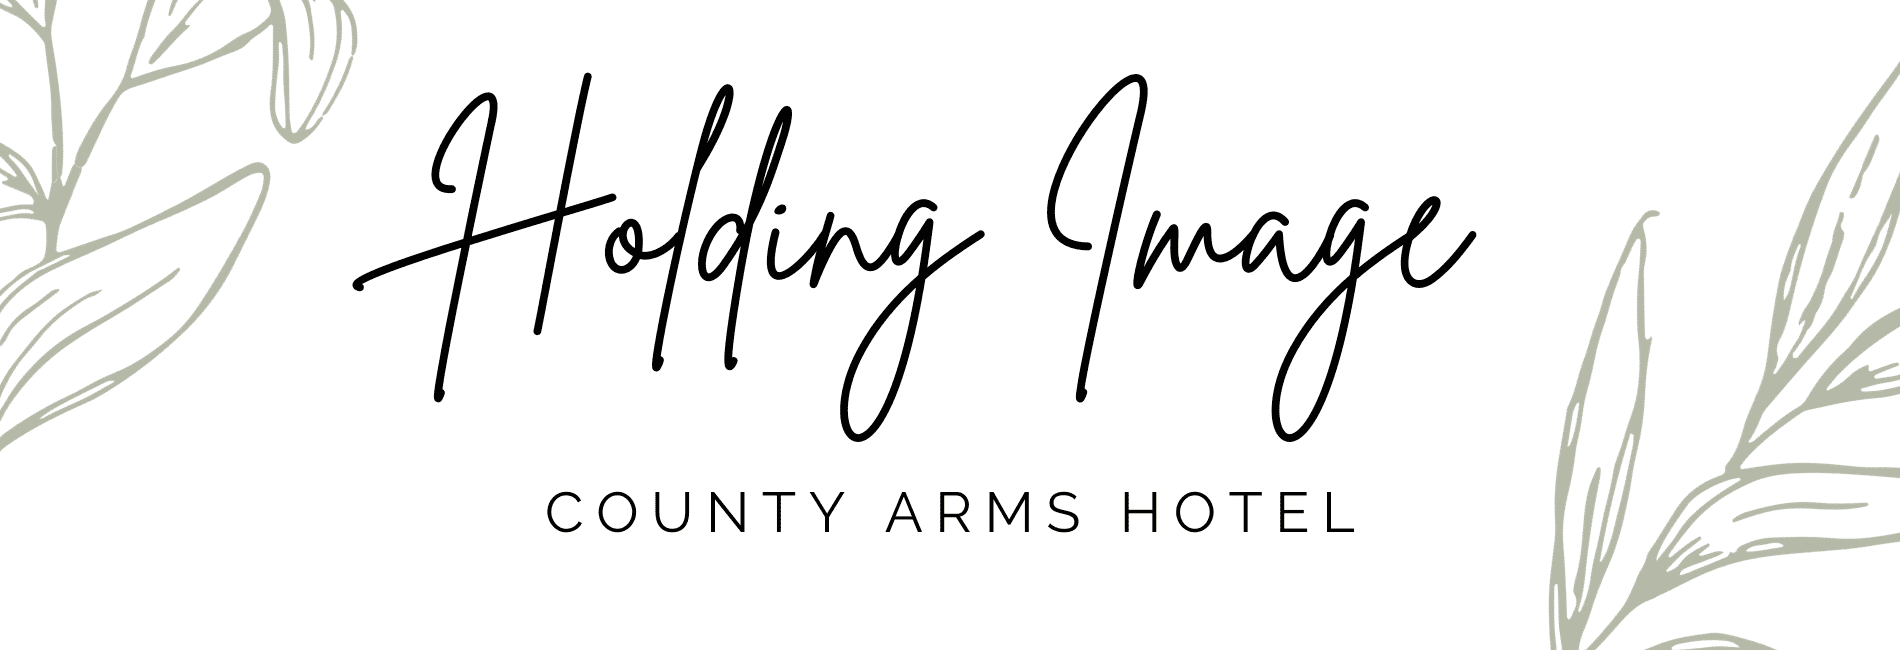 Holding image cms-county-arms-hotel